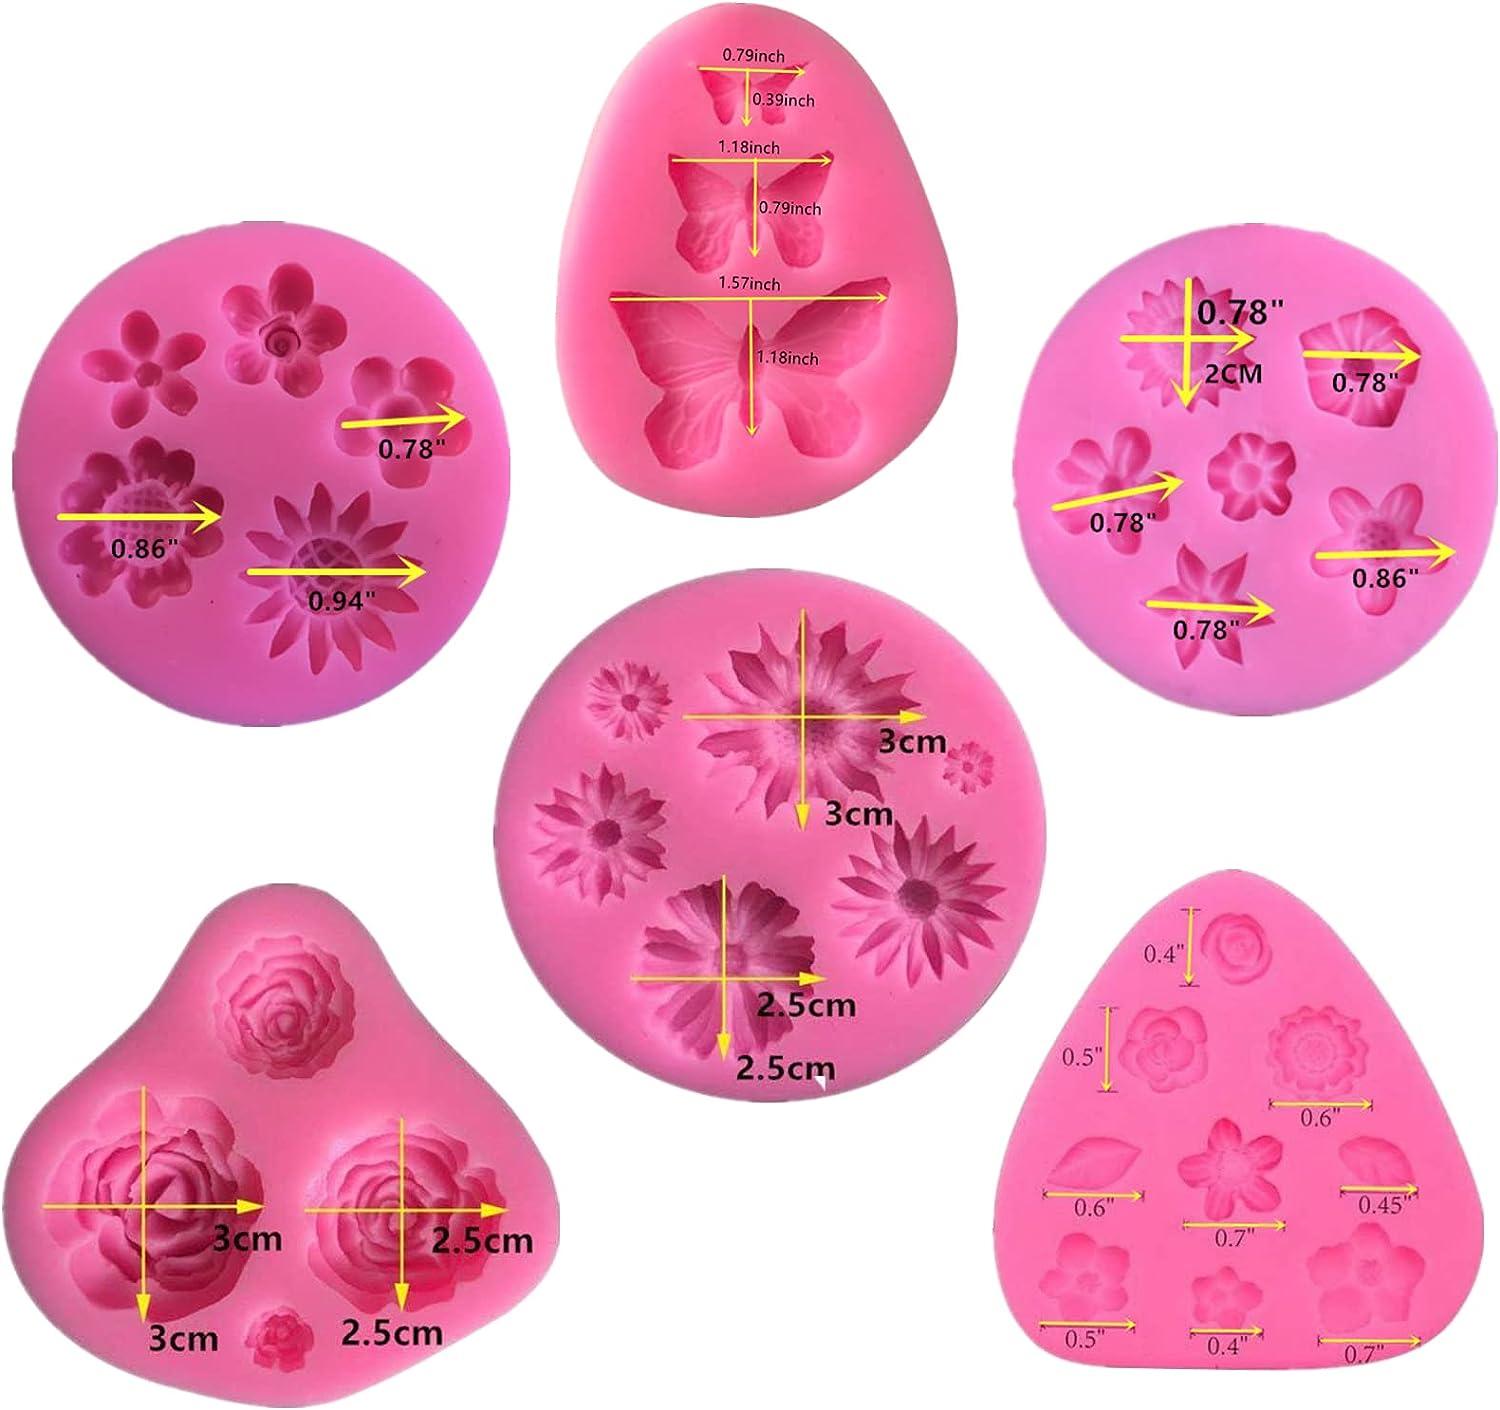  2Pcs Polymer Clay Molds Jewelry Making Flower Fondant Molds for  Cake Decorating Butterfly Silicone Molds for Baking Iod Molds for Air Dry  Clay Chocolate Soap Resin Crafting Projects : 藝術、手工藝與縫紉